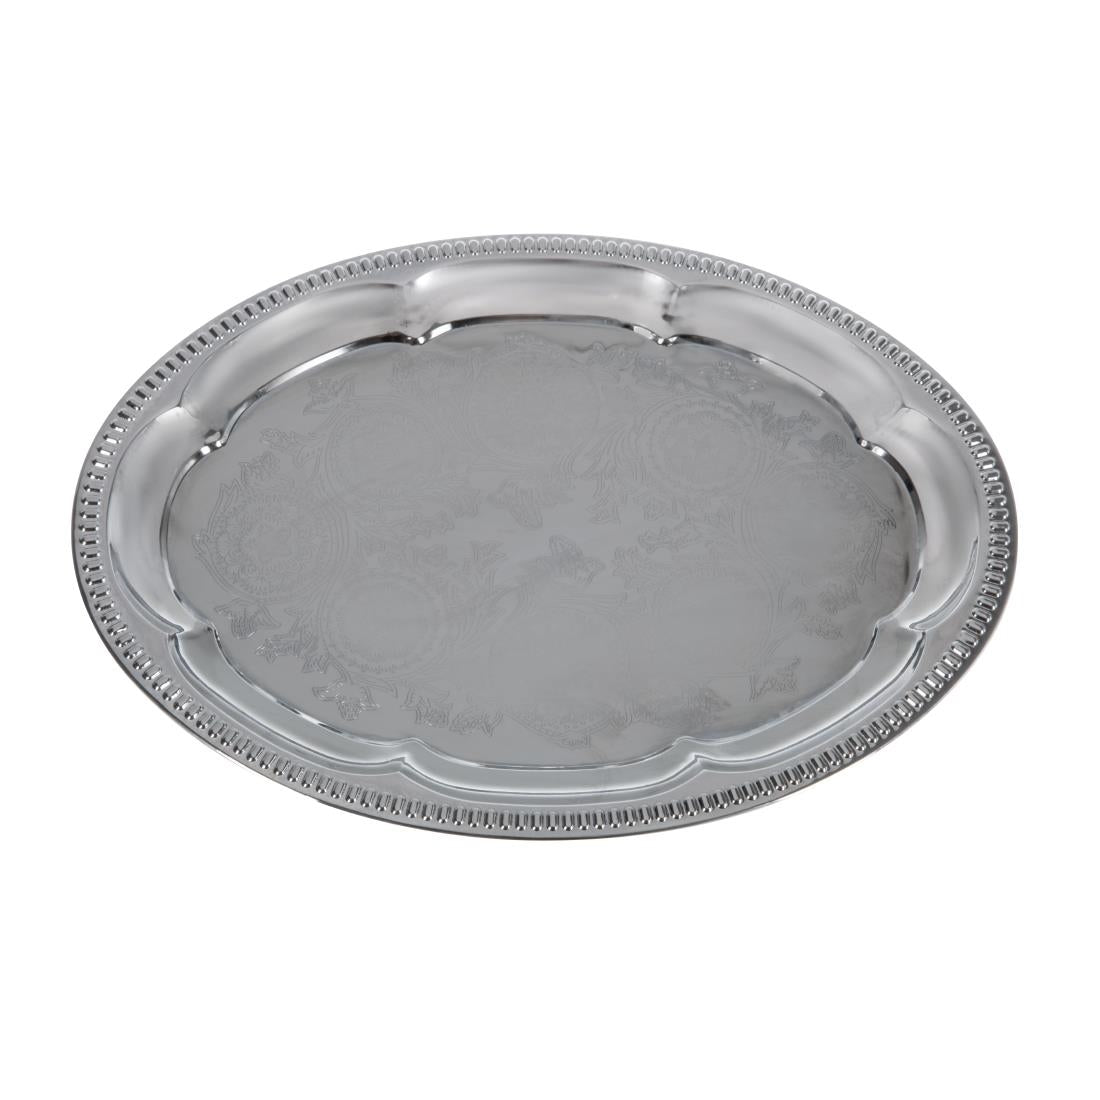 APS Chrome-Plated Stainless Steel Oval Tea Tray 300mm JD Catering Equipment Solutions Ltd